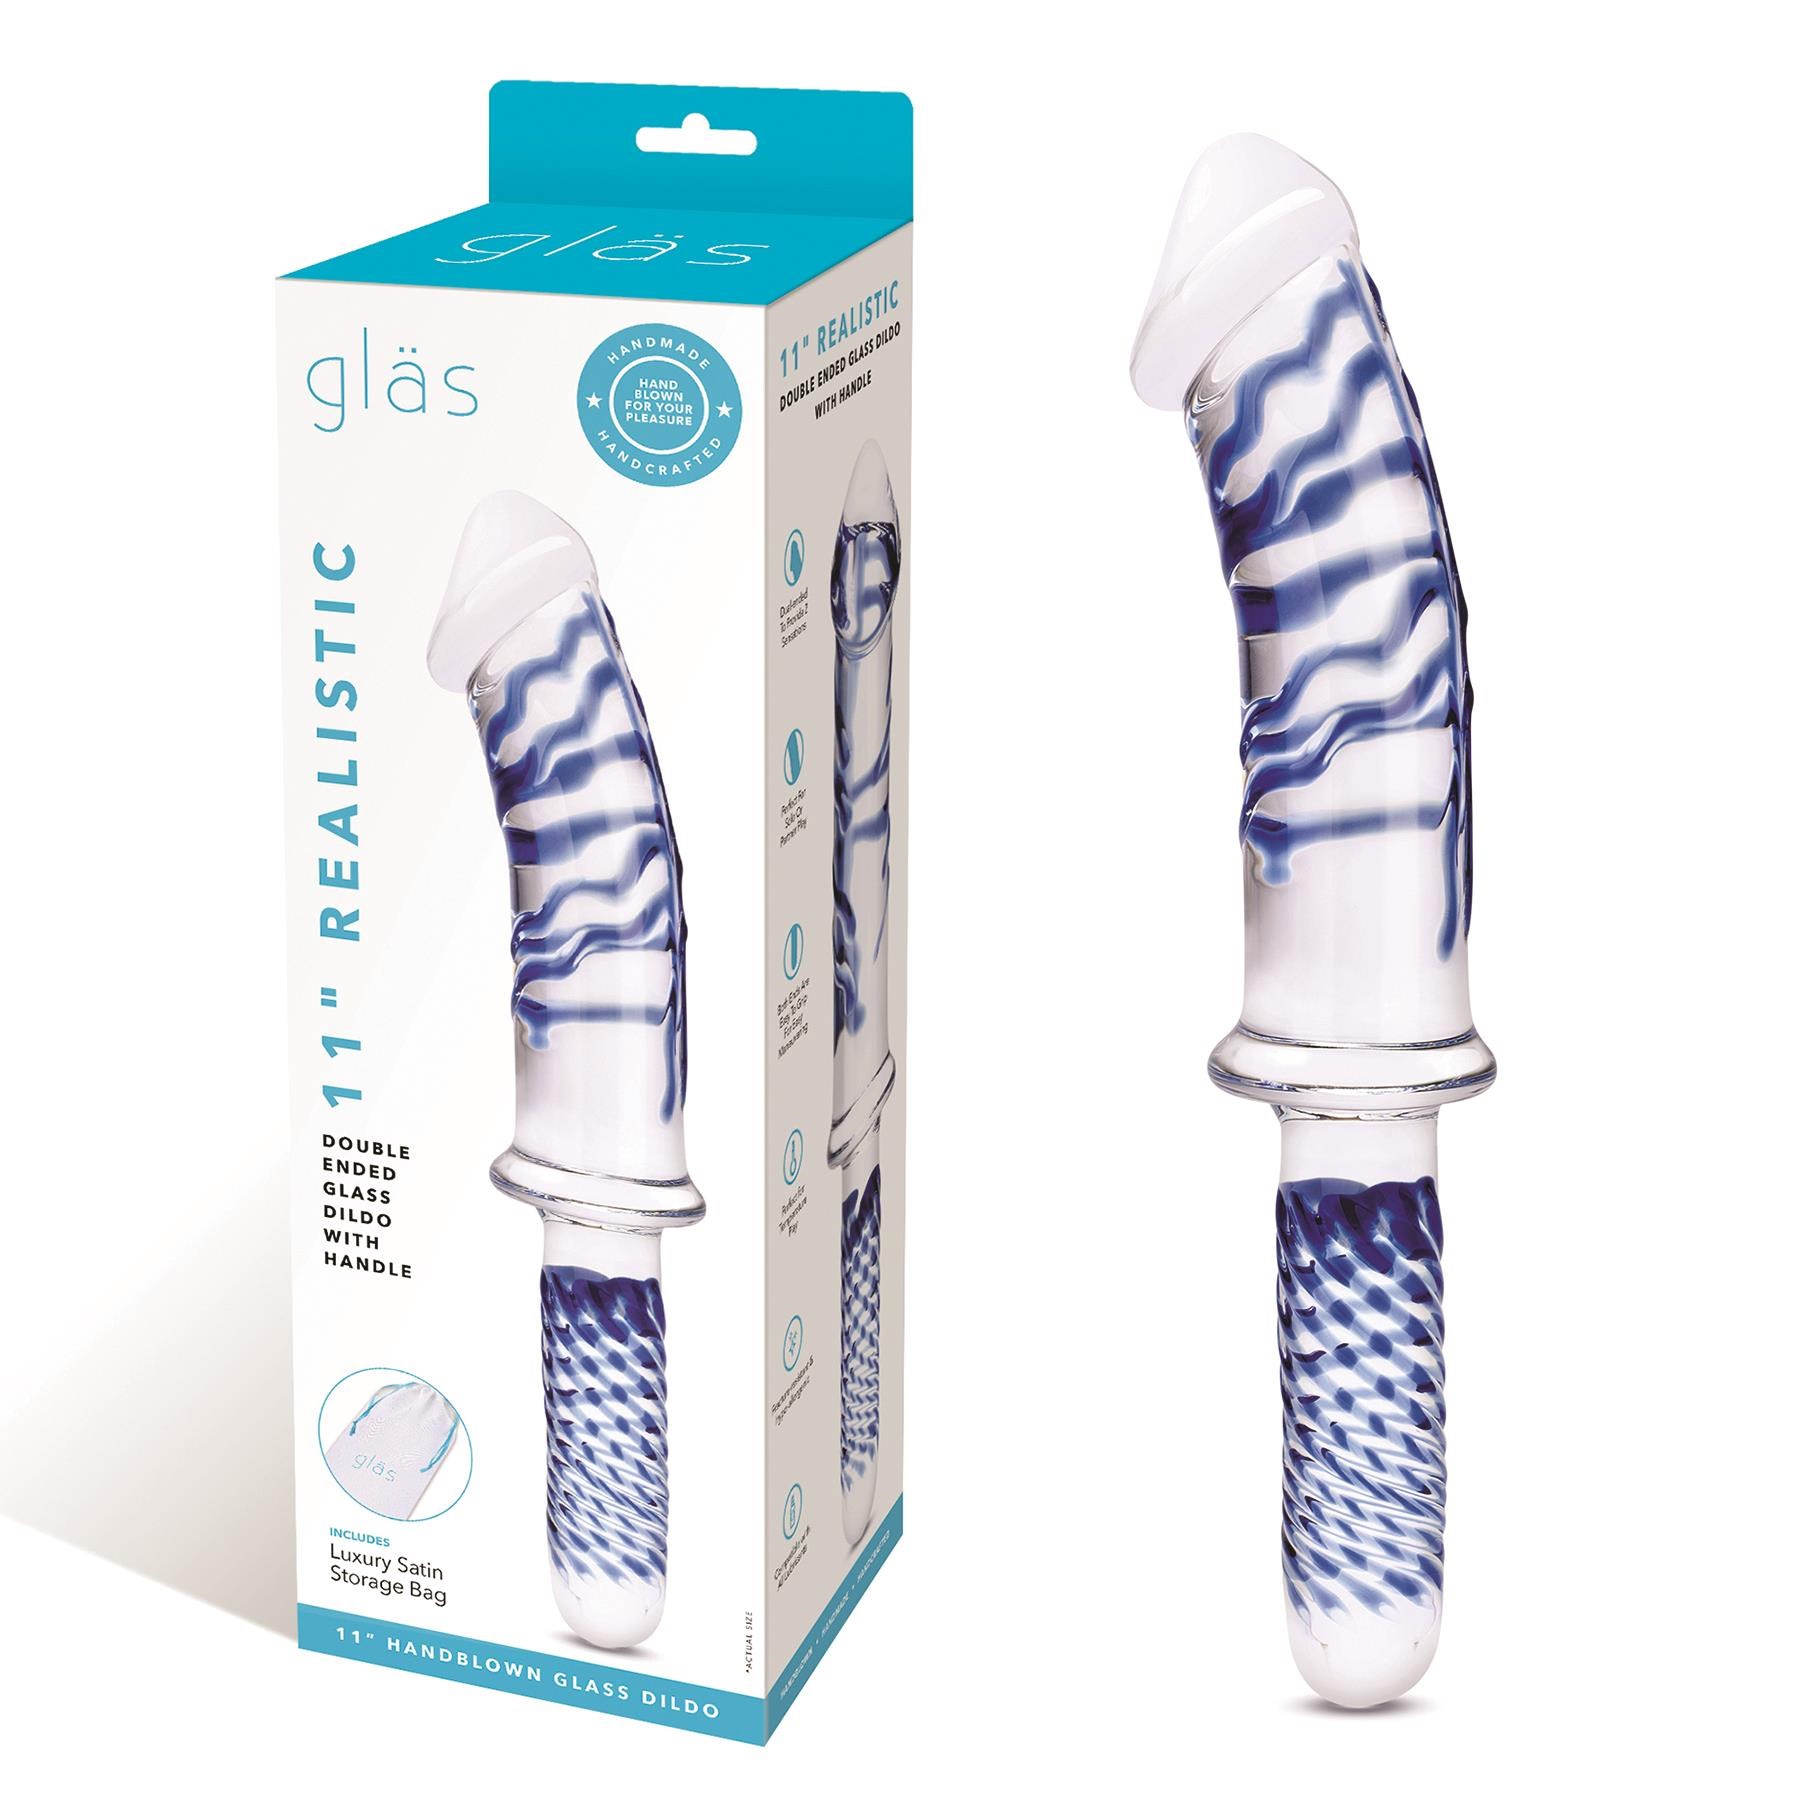 Glas 11" Realistic Double Ended Glass Dildo - Product and Packaging